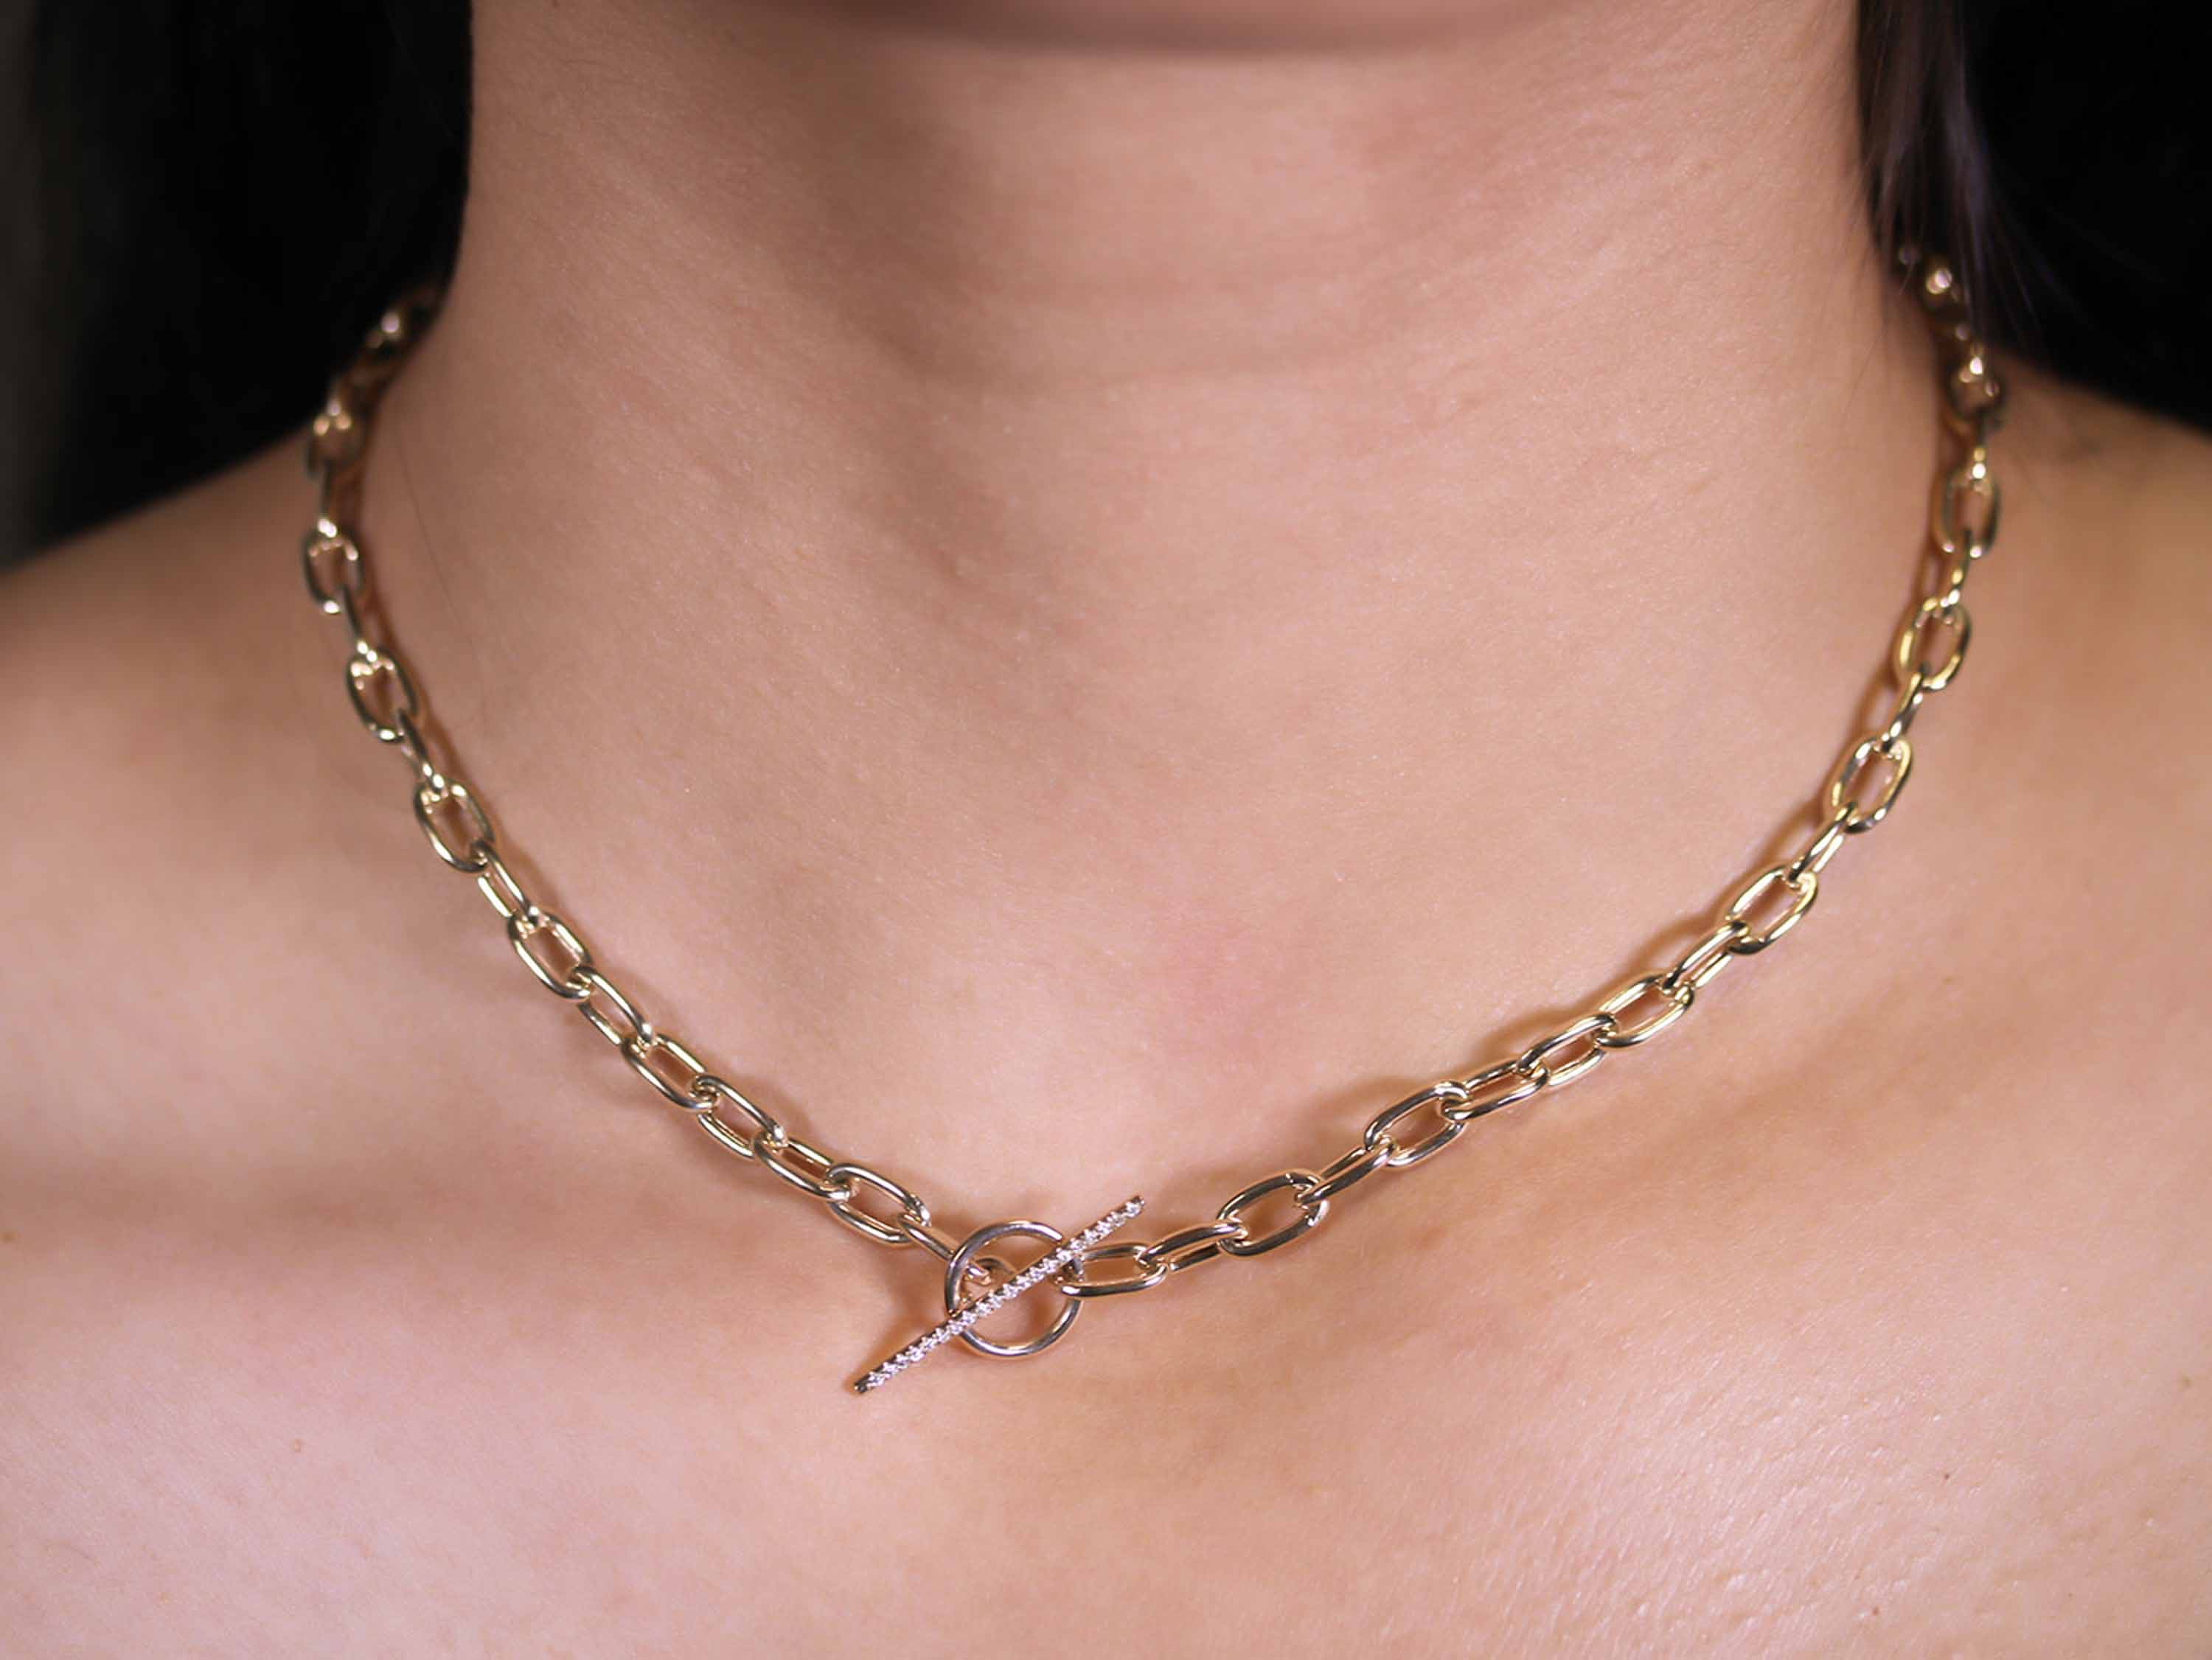 OVAL LINK CHAIN NECKLACE WITH TOGGLE CLASP | Penwarden Fine Jewellery